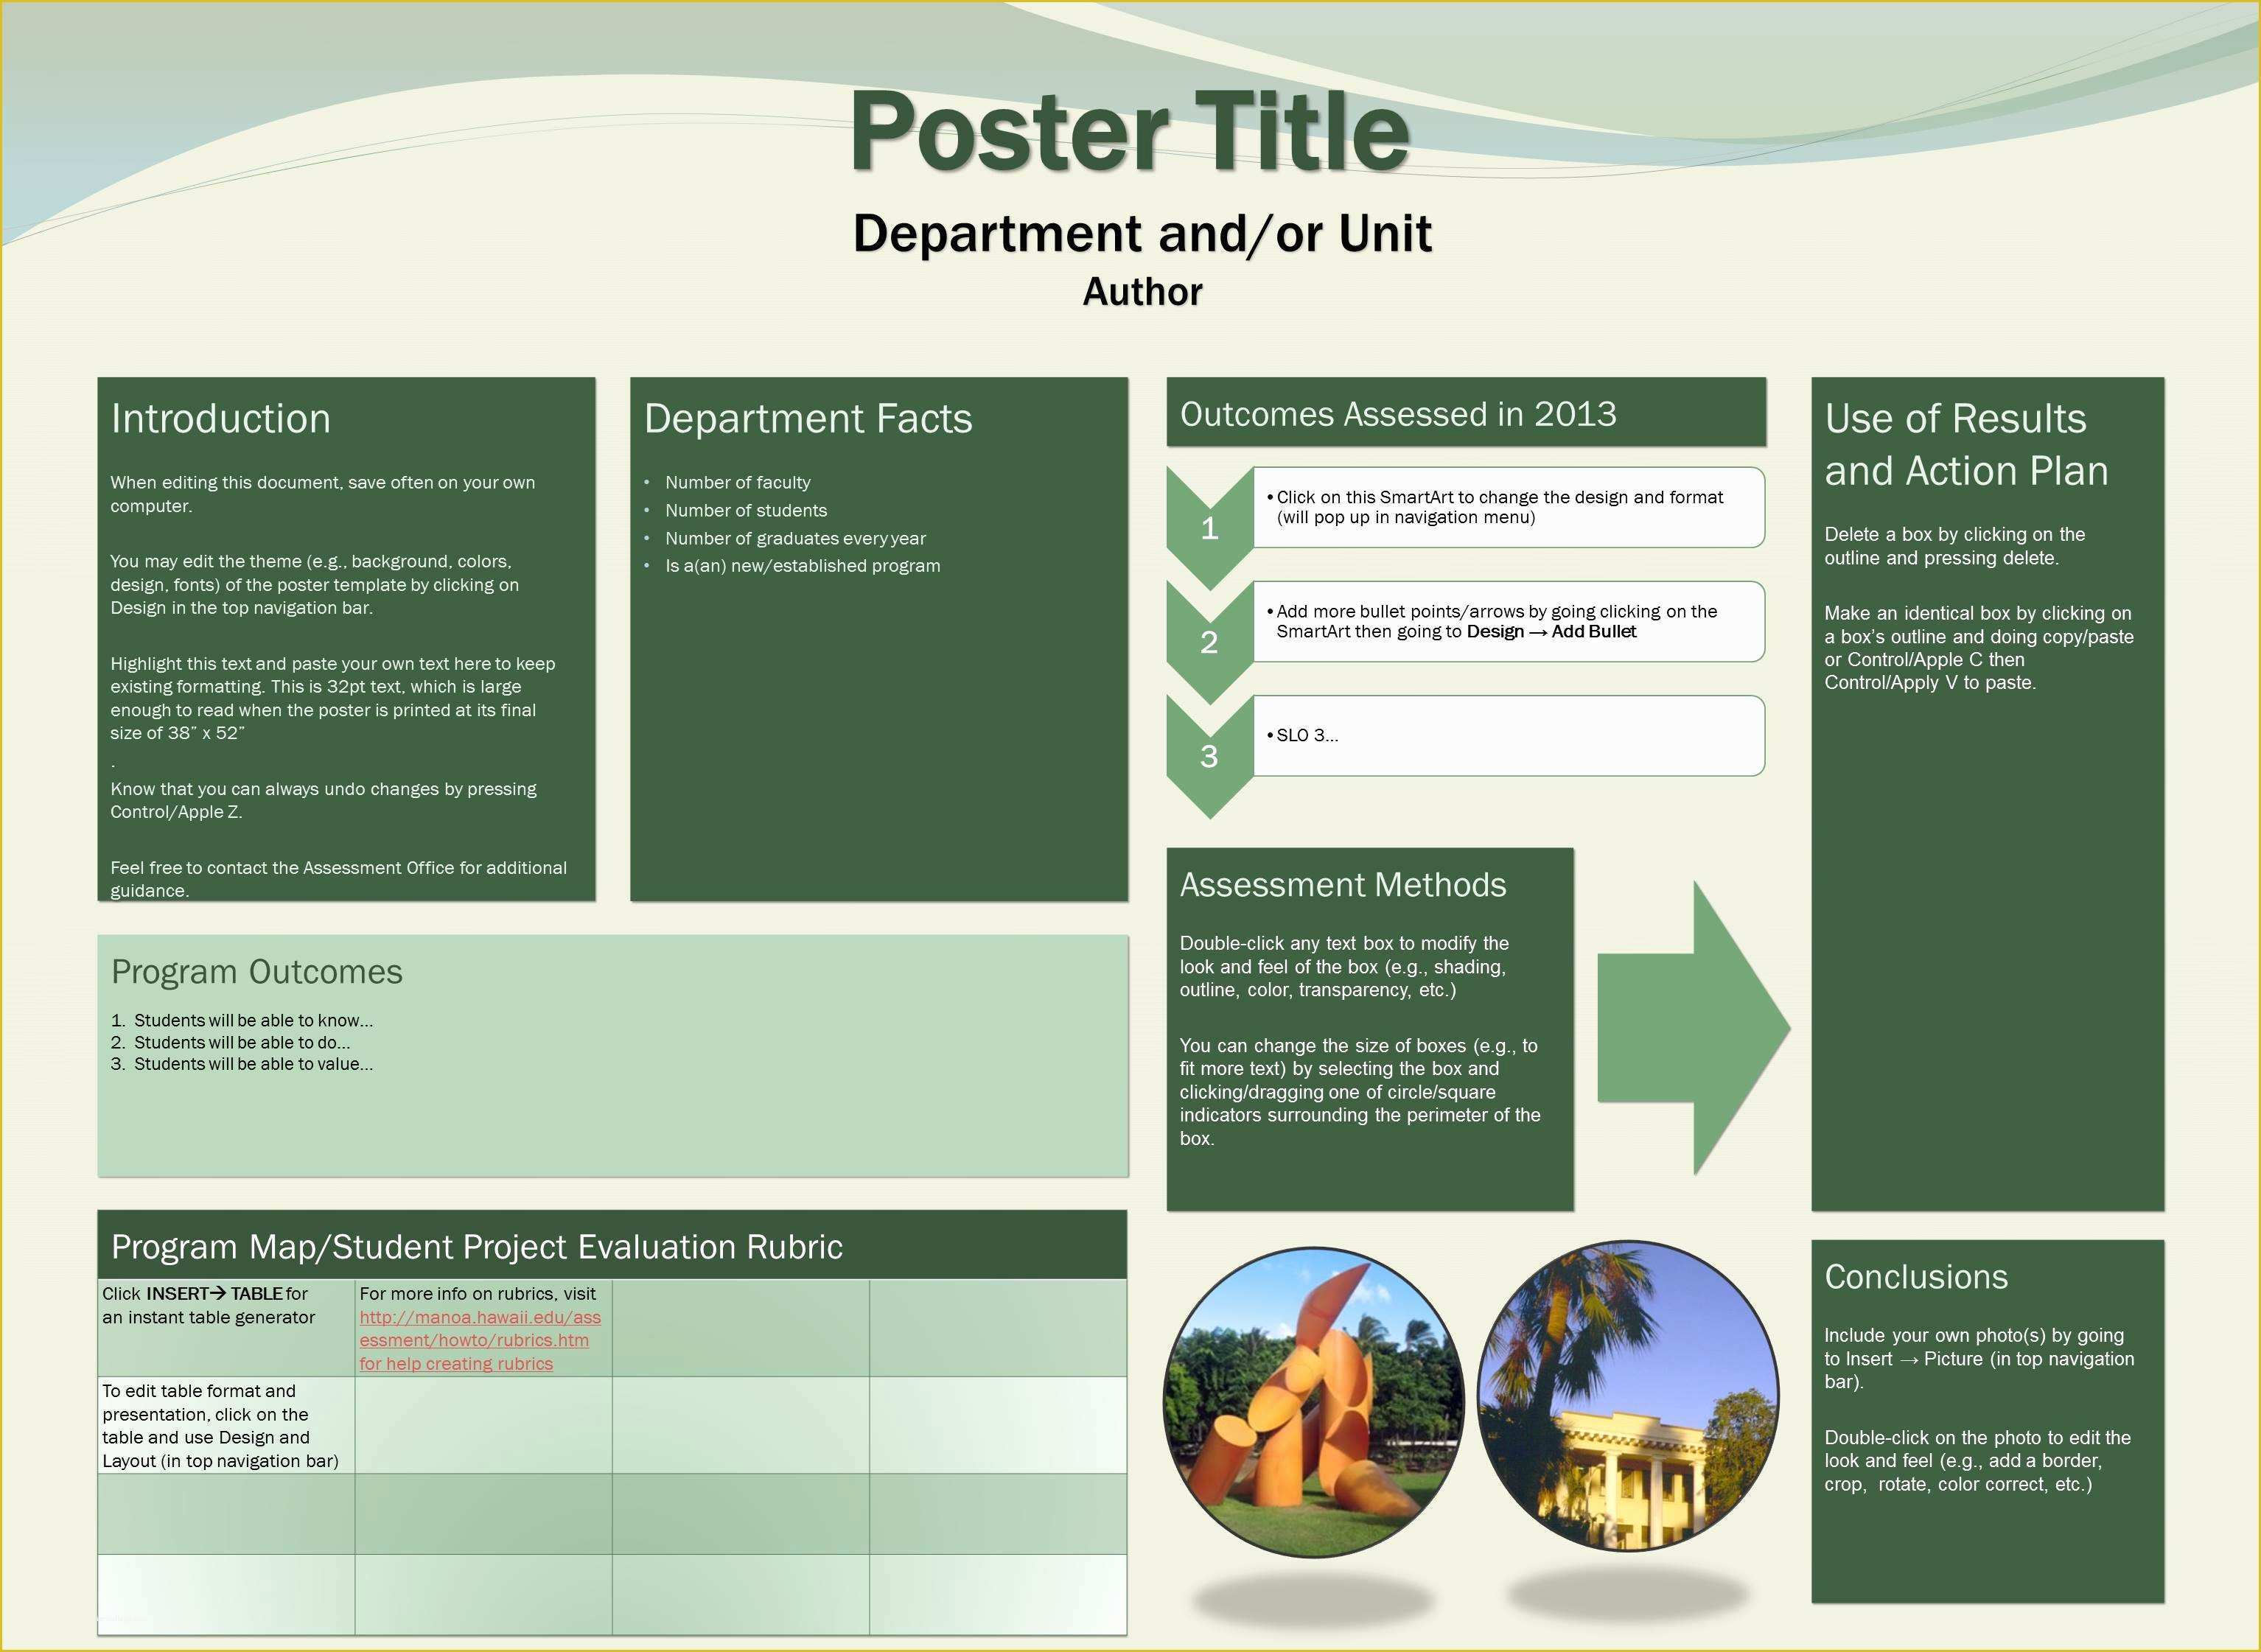 Scientific Poster Design Templates Free Of University Of Hawaii at Manoa assessment Fice